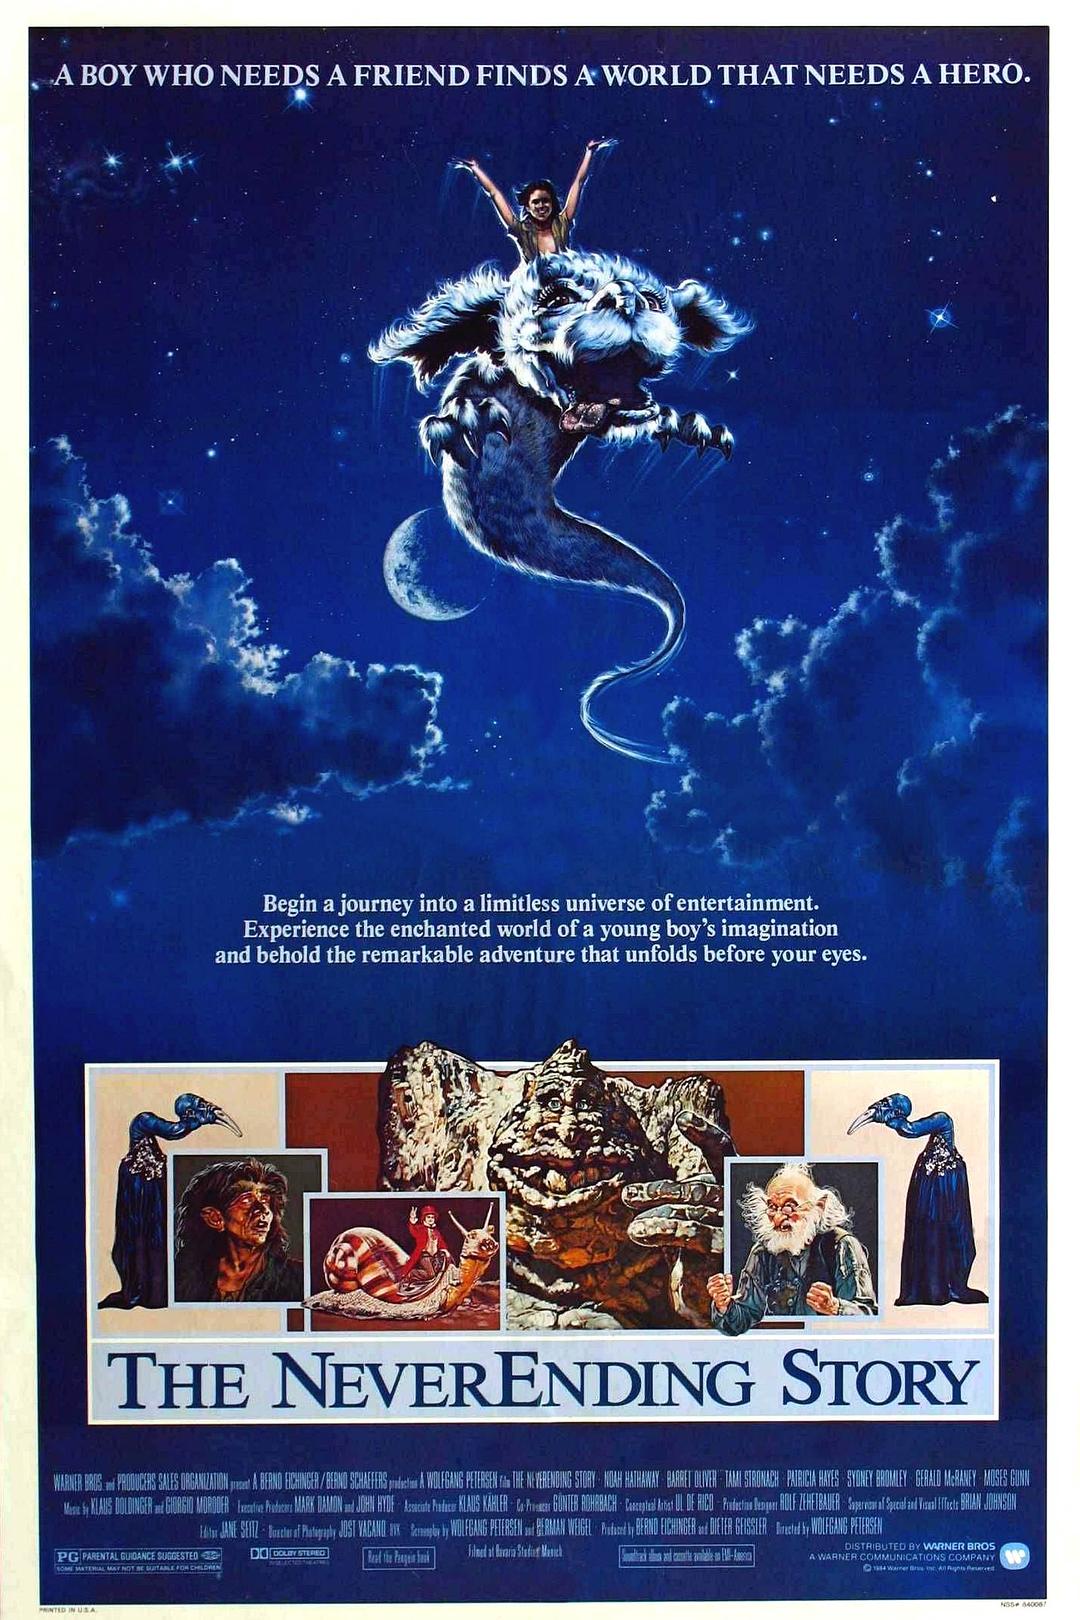 ħ The.Neverending.Story.1984.EXTENDED.1080p.BluRay.x264.DTS-FGT 9.60GB-1.png